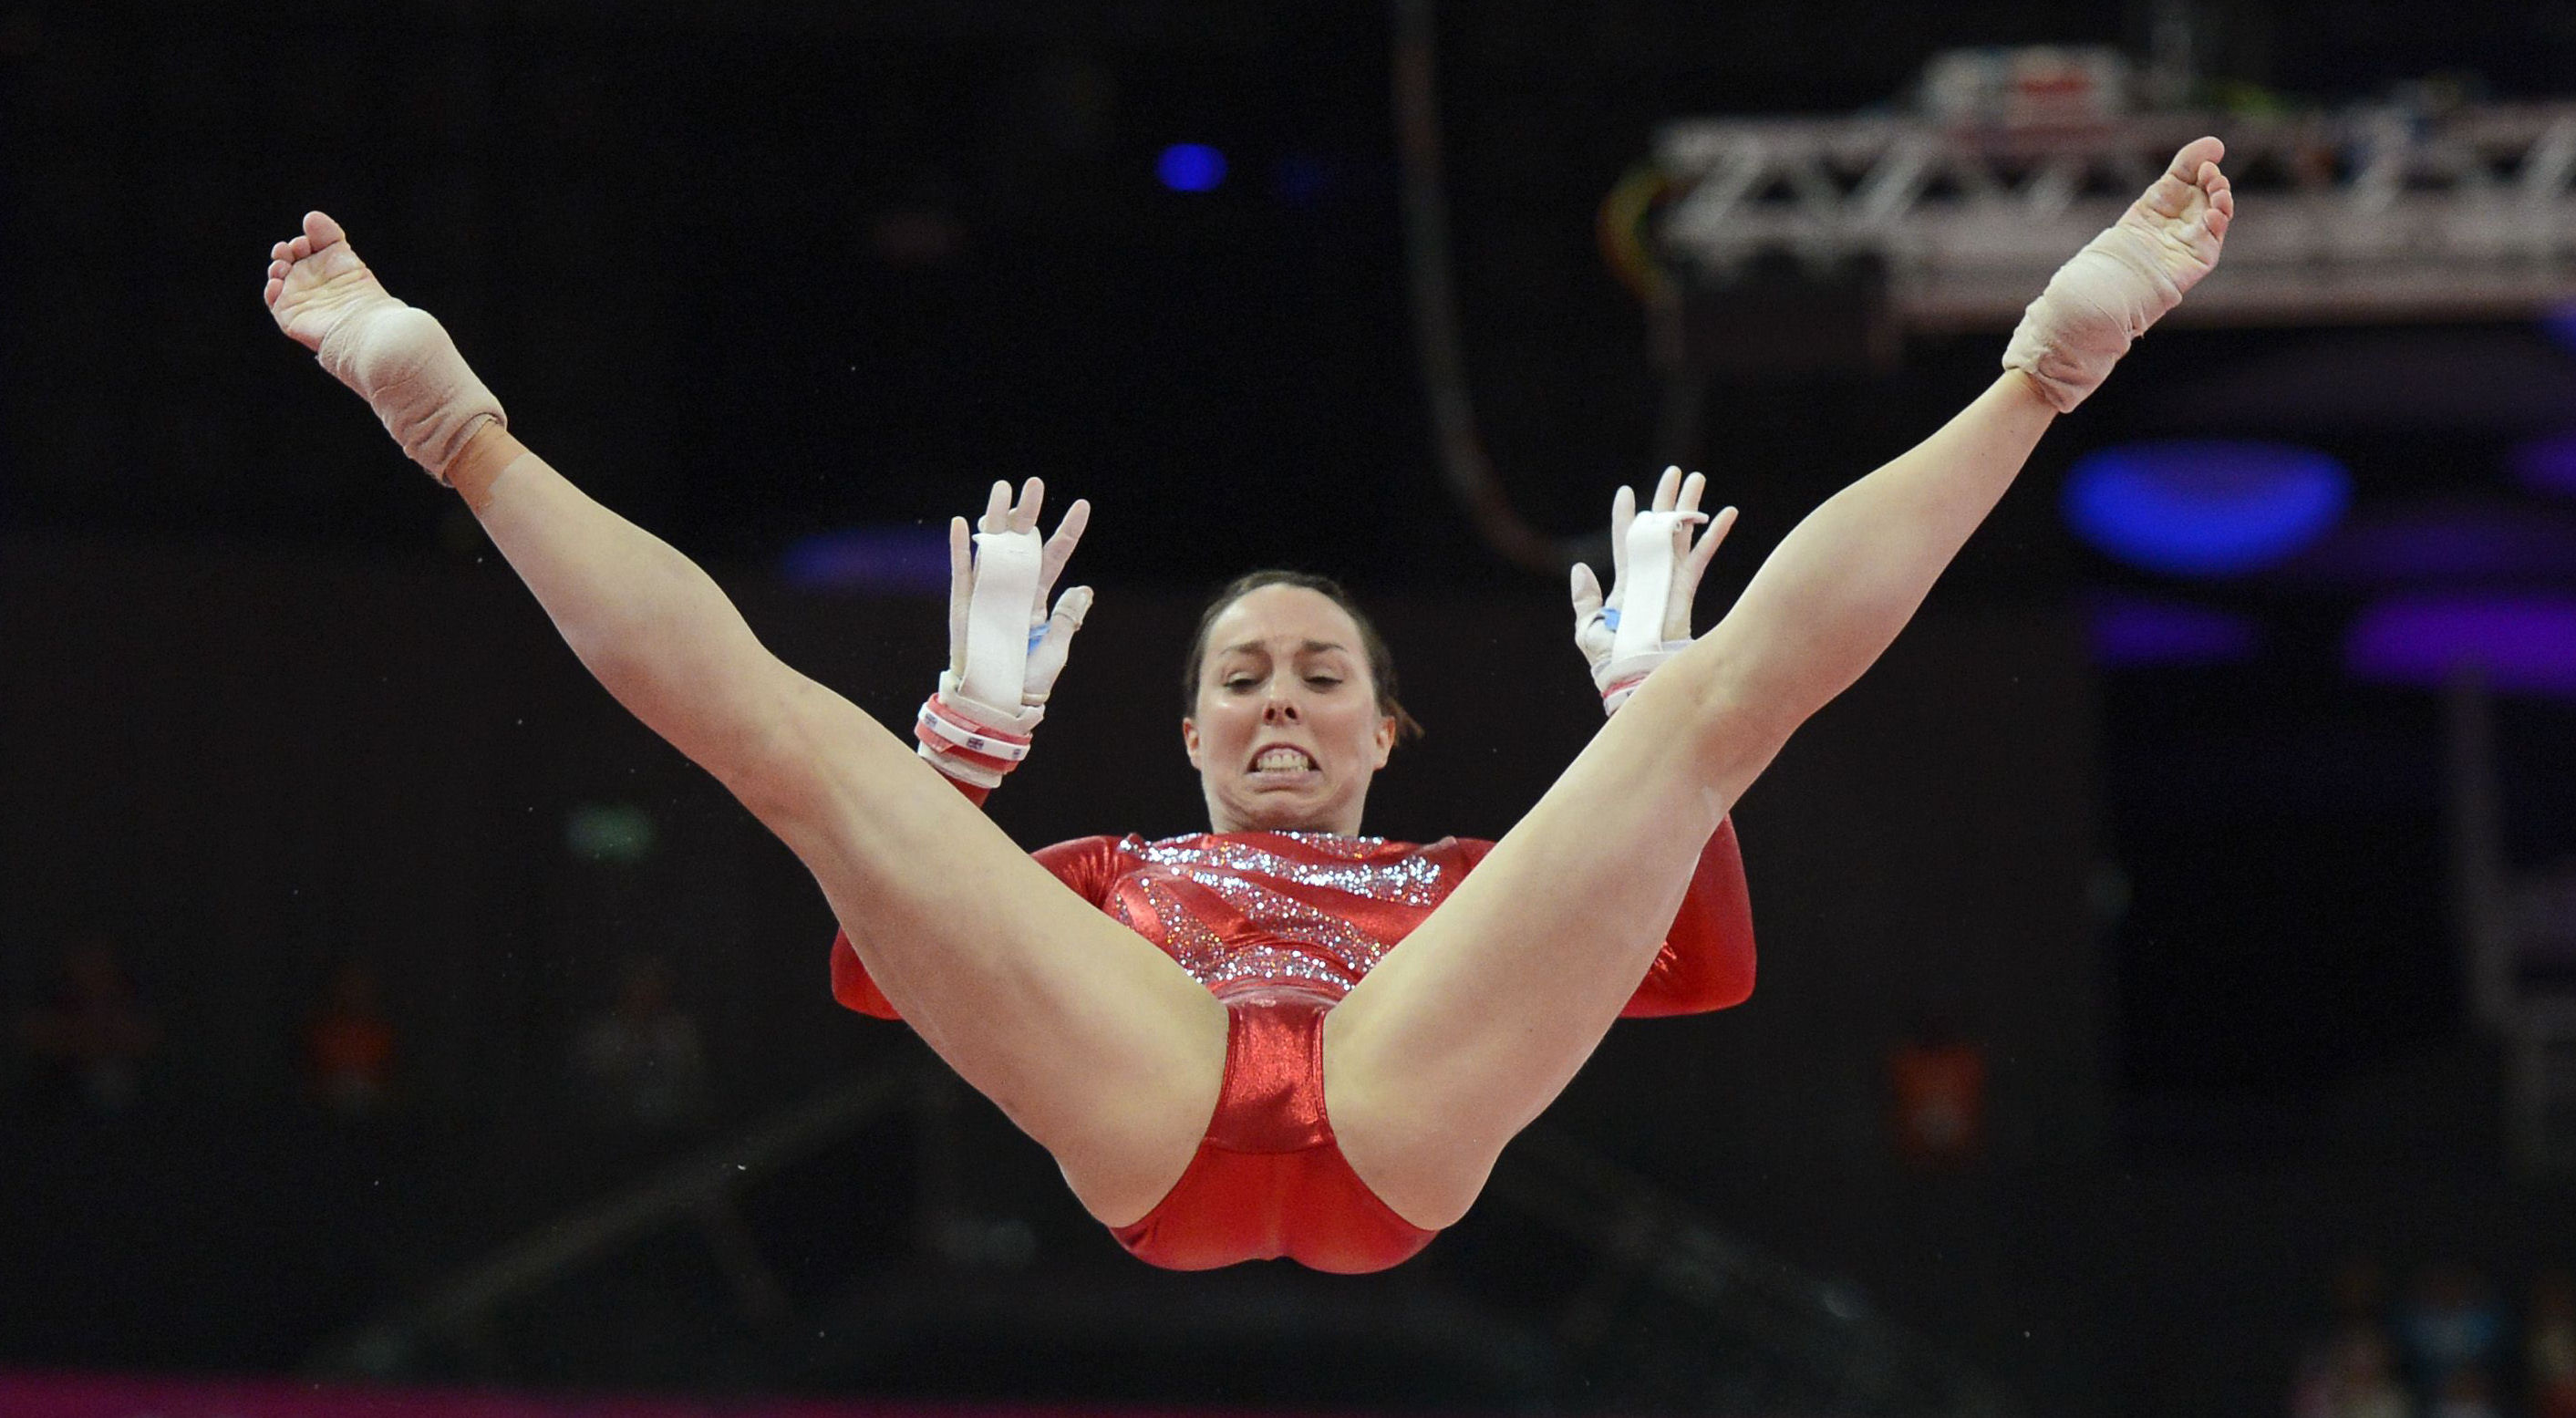 Beth Tweddle is a getbigger's gymnast and would defo spit on your cock